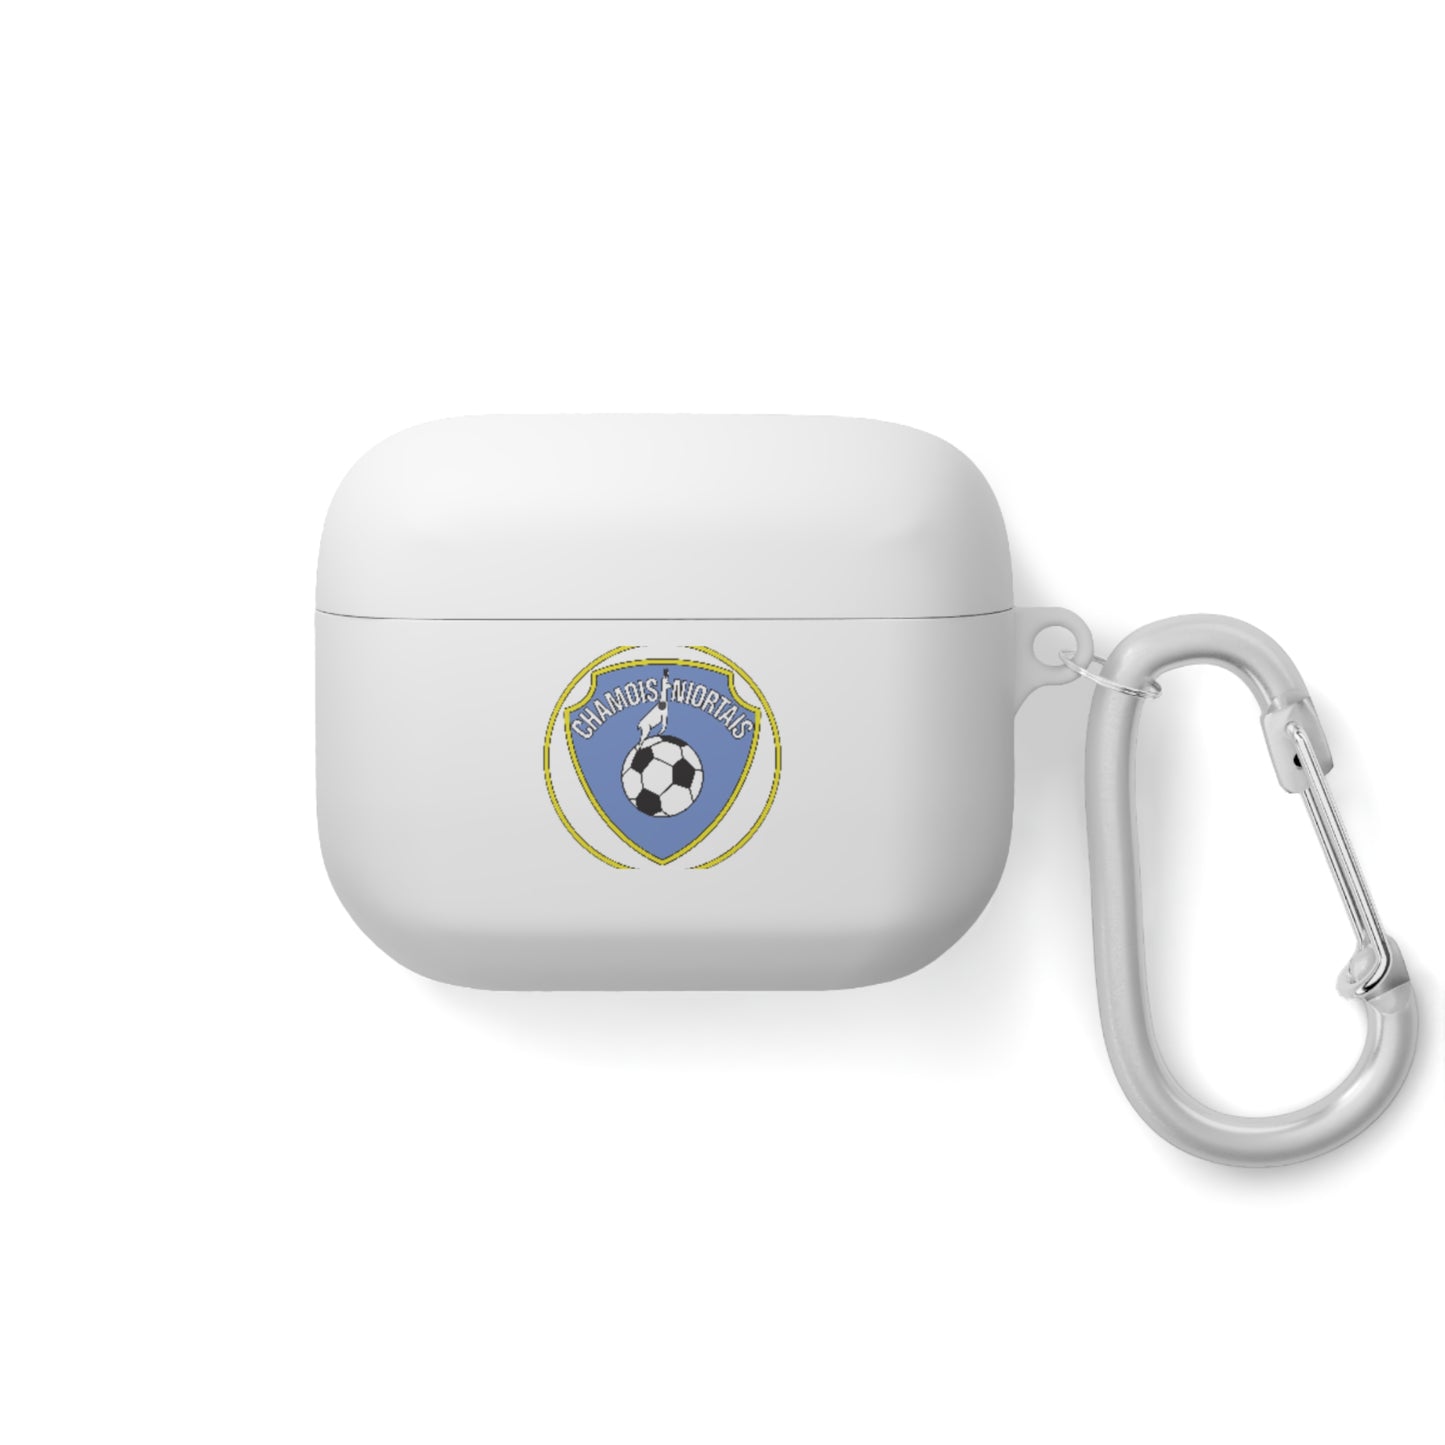 Chamois Niort (80's logo) AirPods and AirPods Pro Case Cover